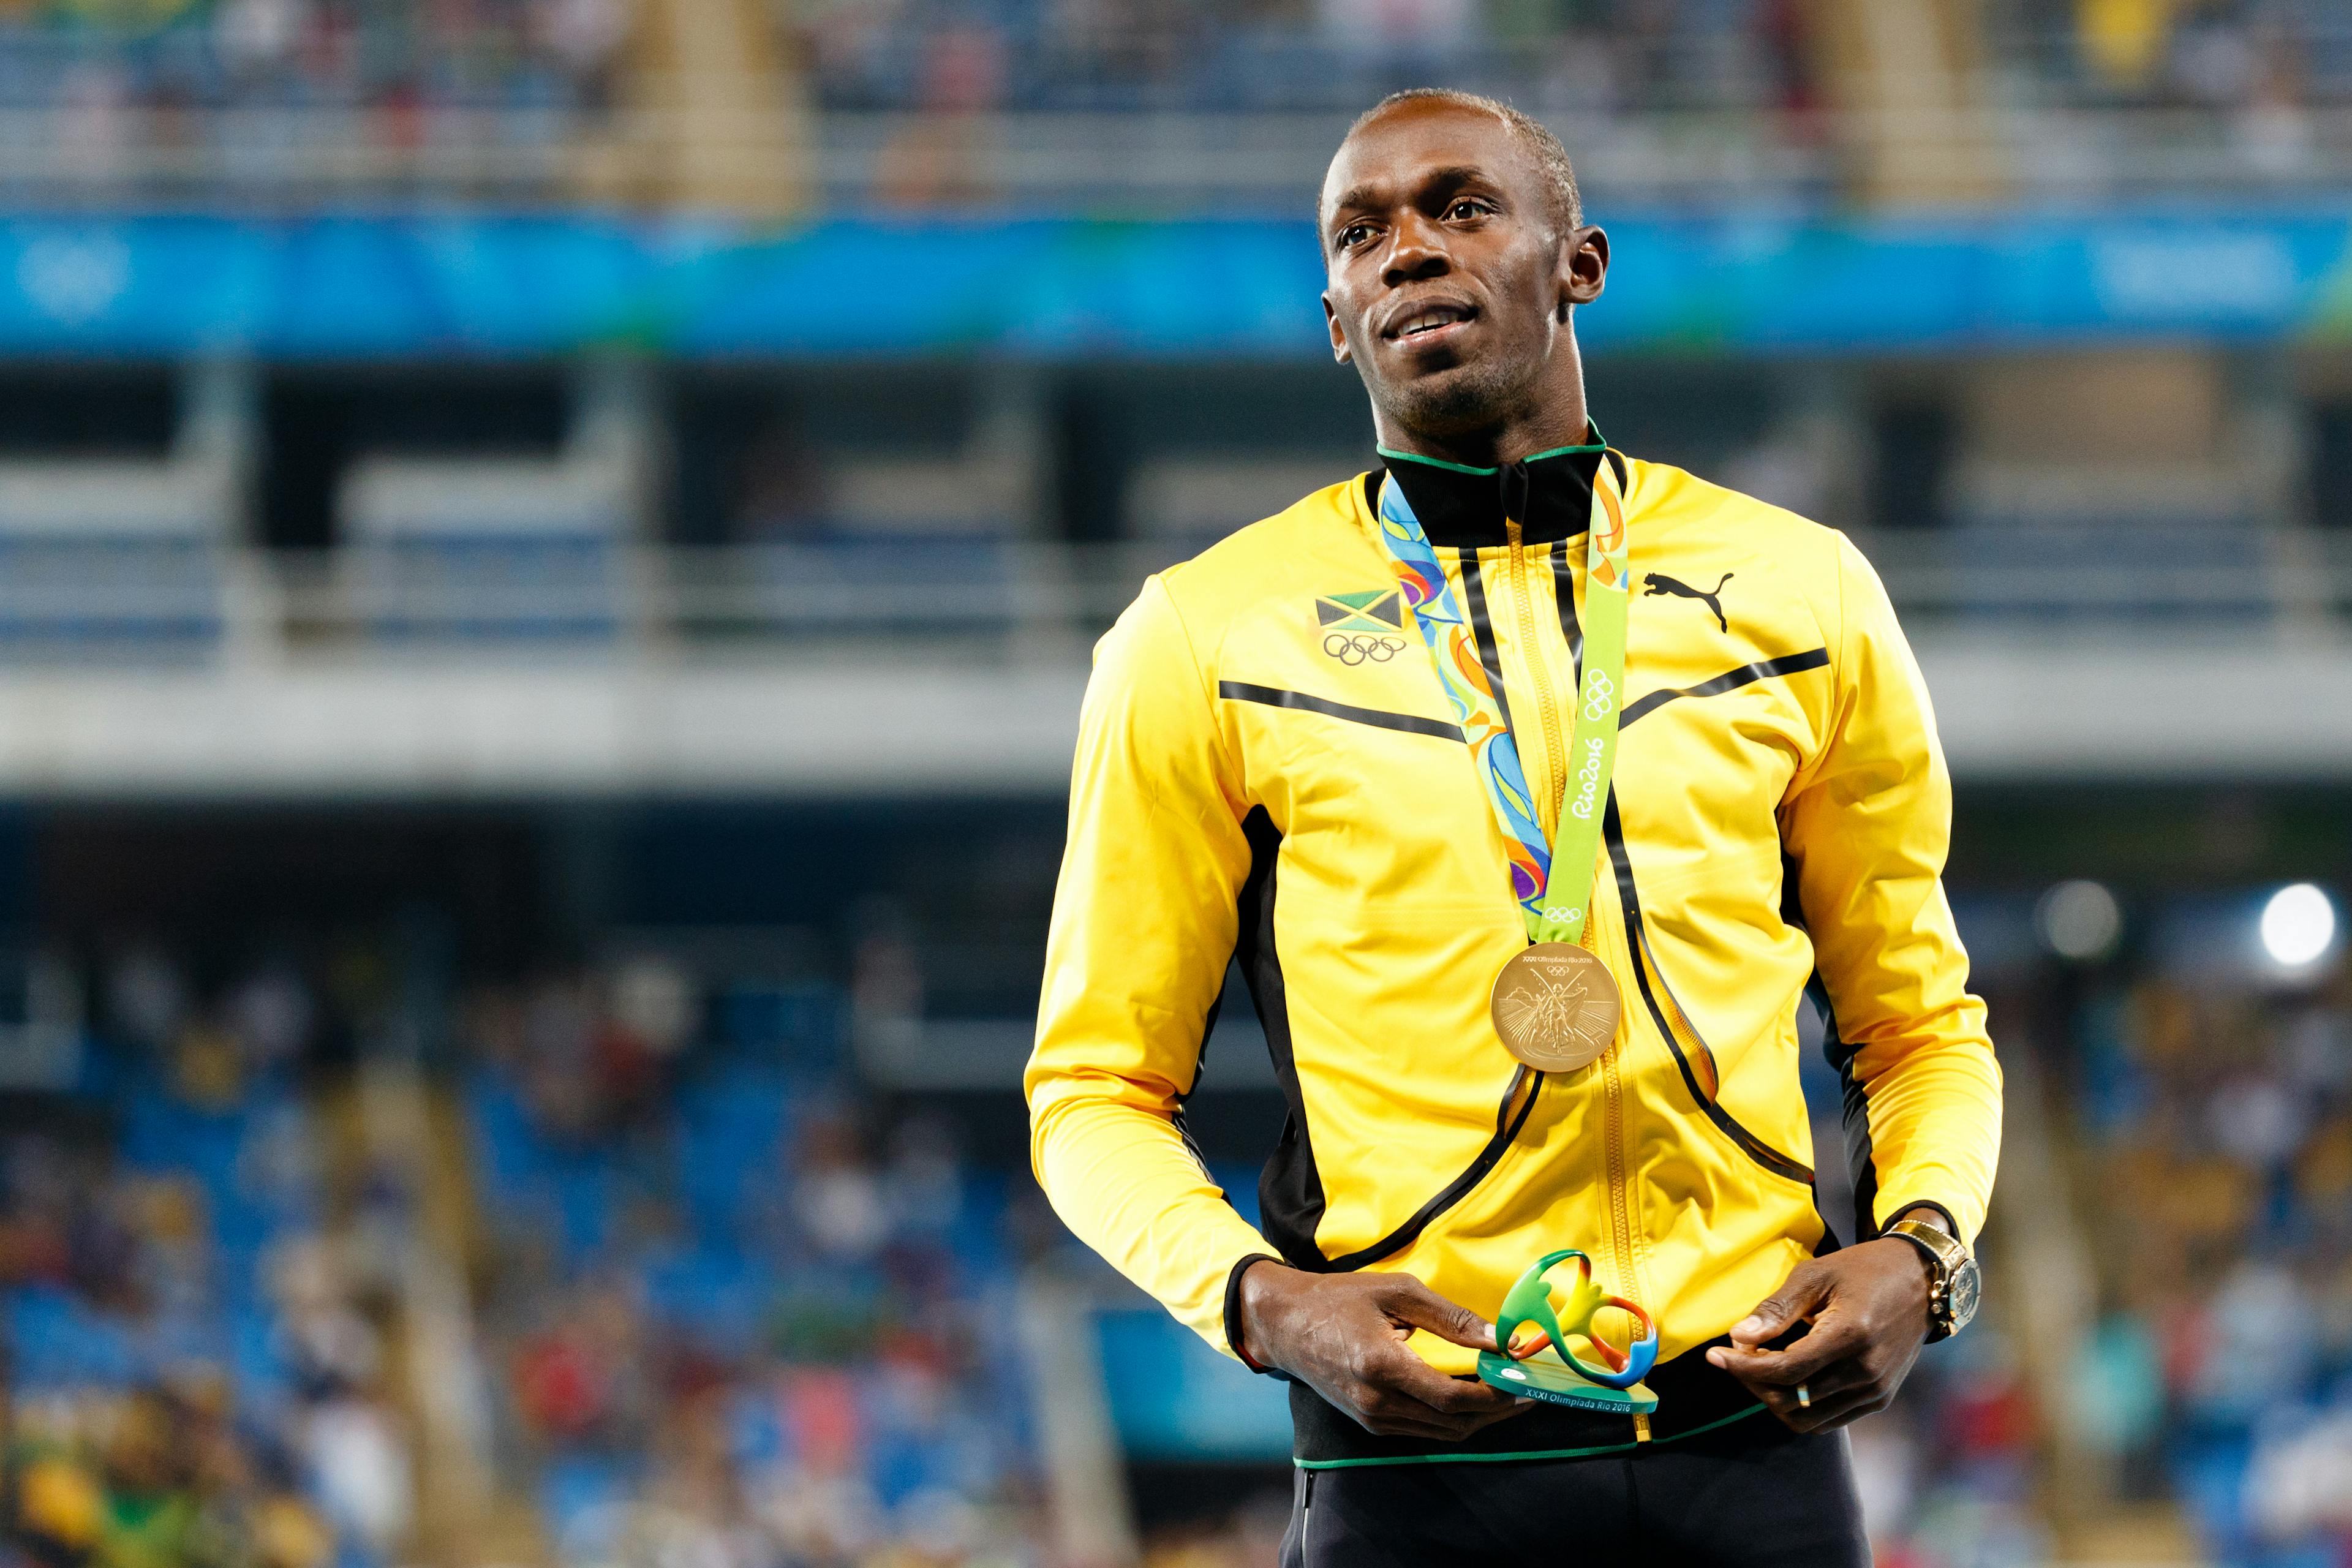 Usain Bolt compares the difficulties of being a parent to being an Olympian